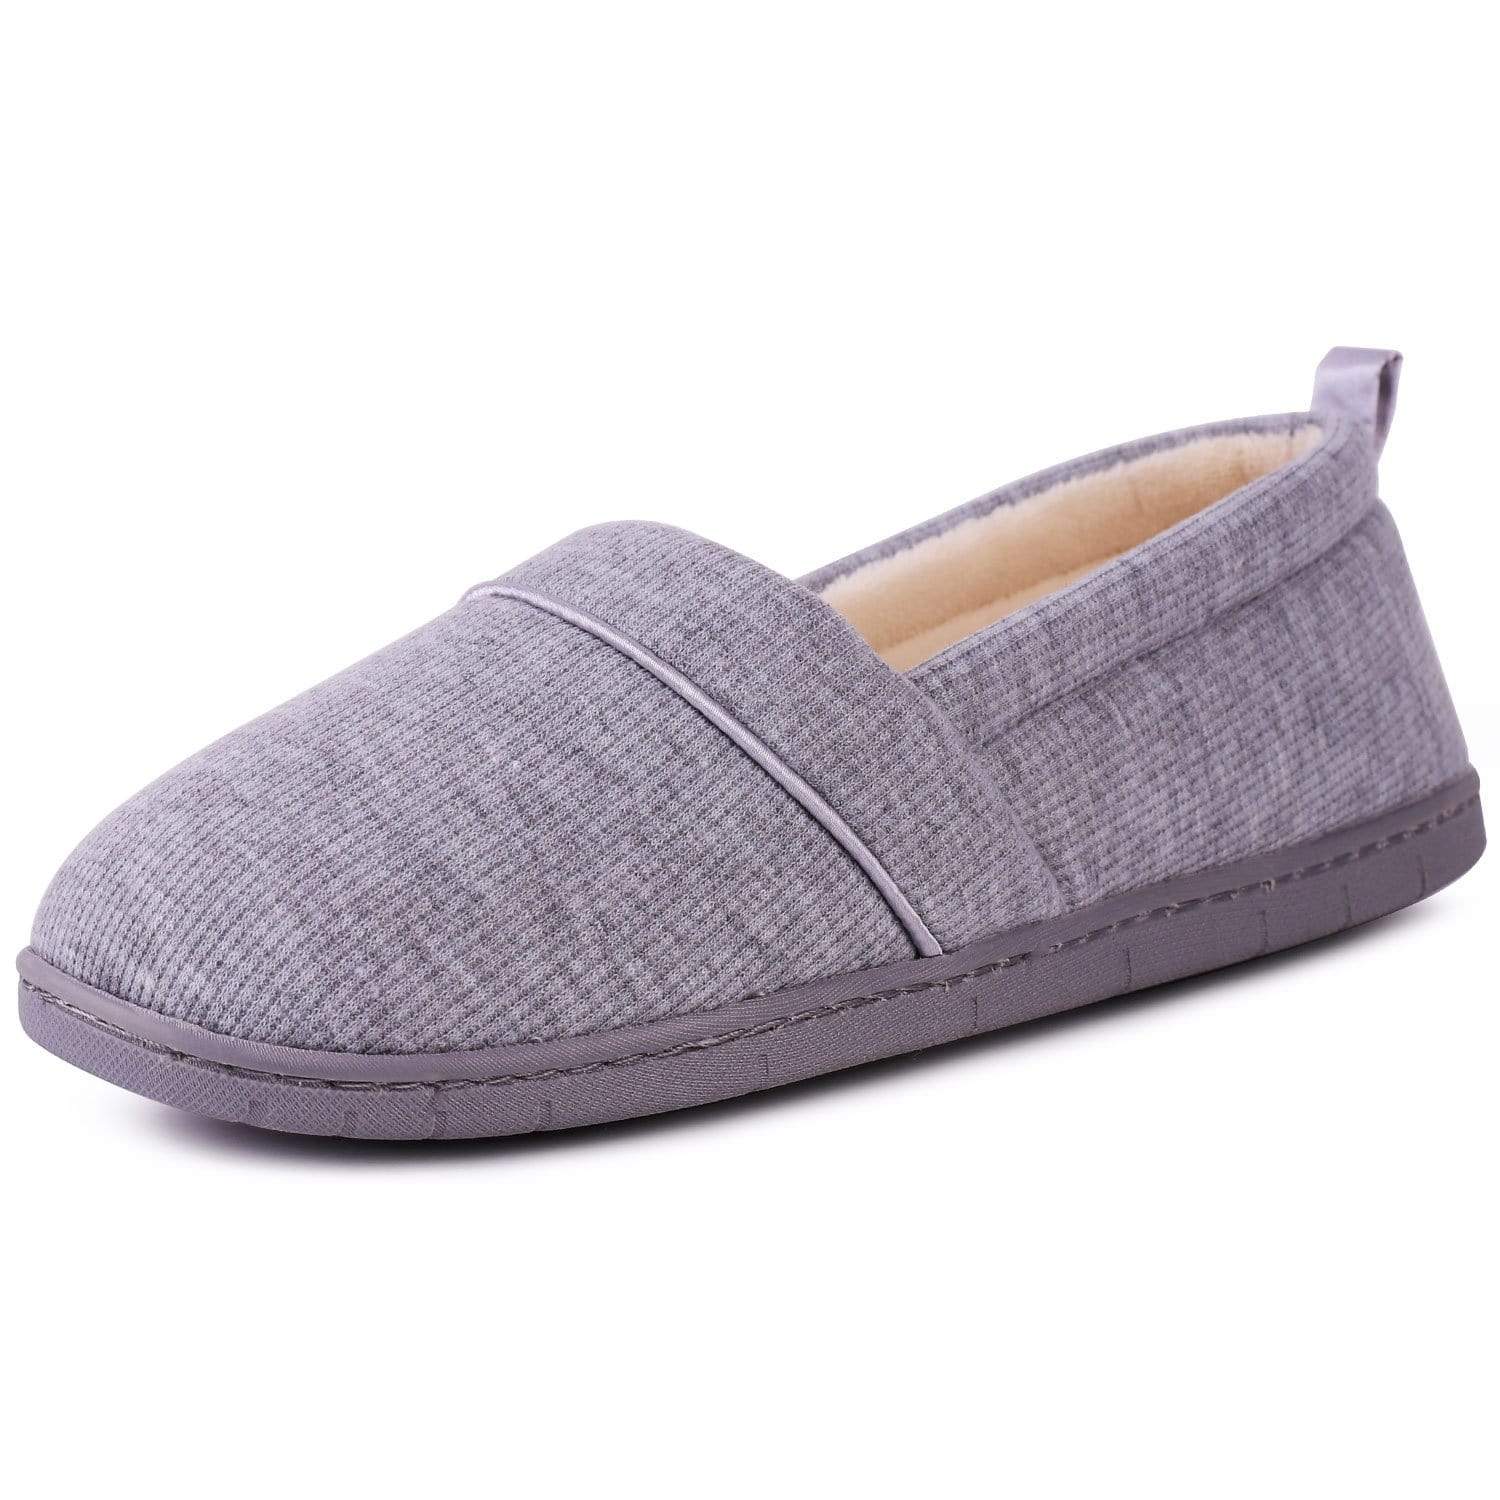 Ladies' EverFoams Cotton Knit Loafers Slippers-Light Grey